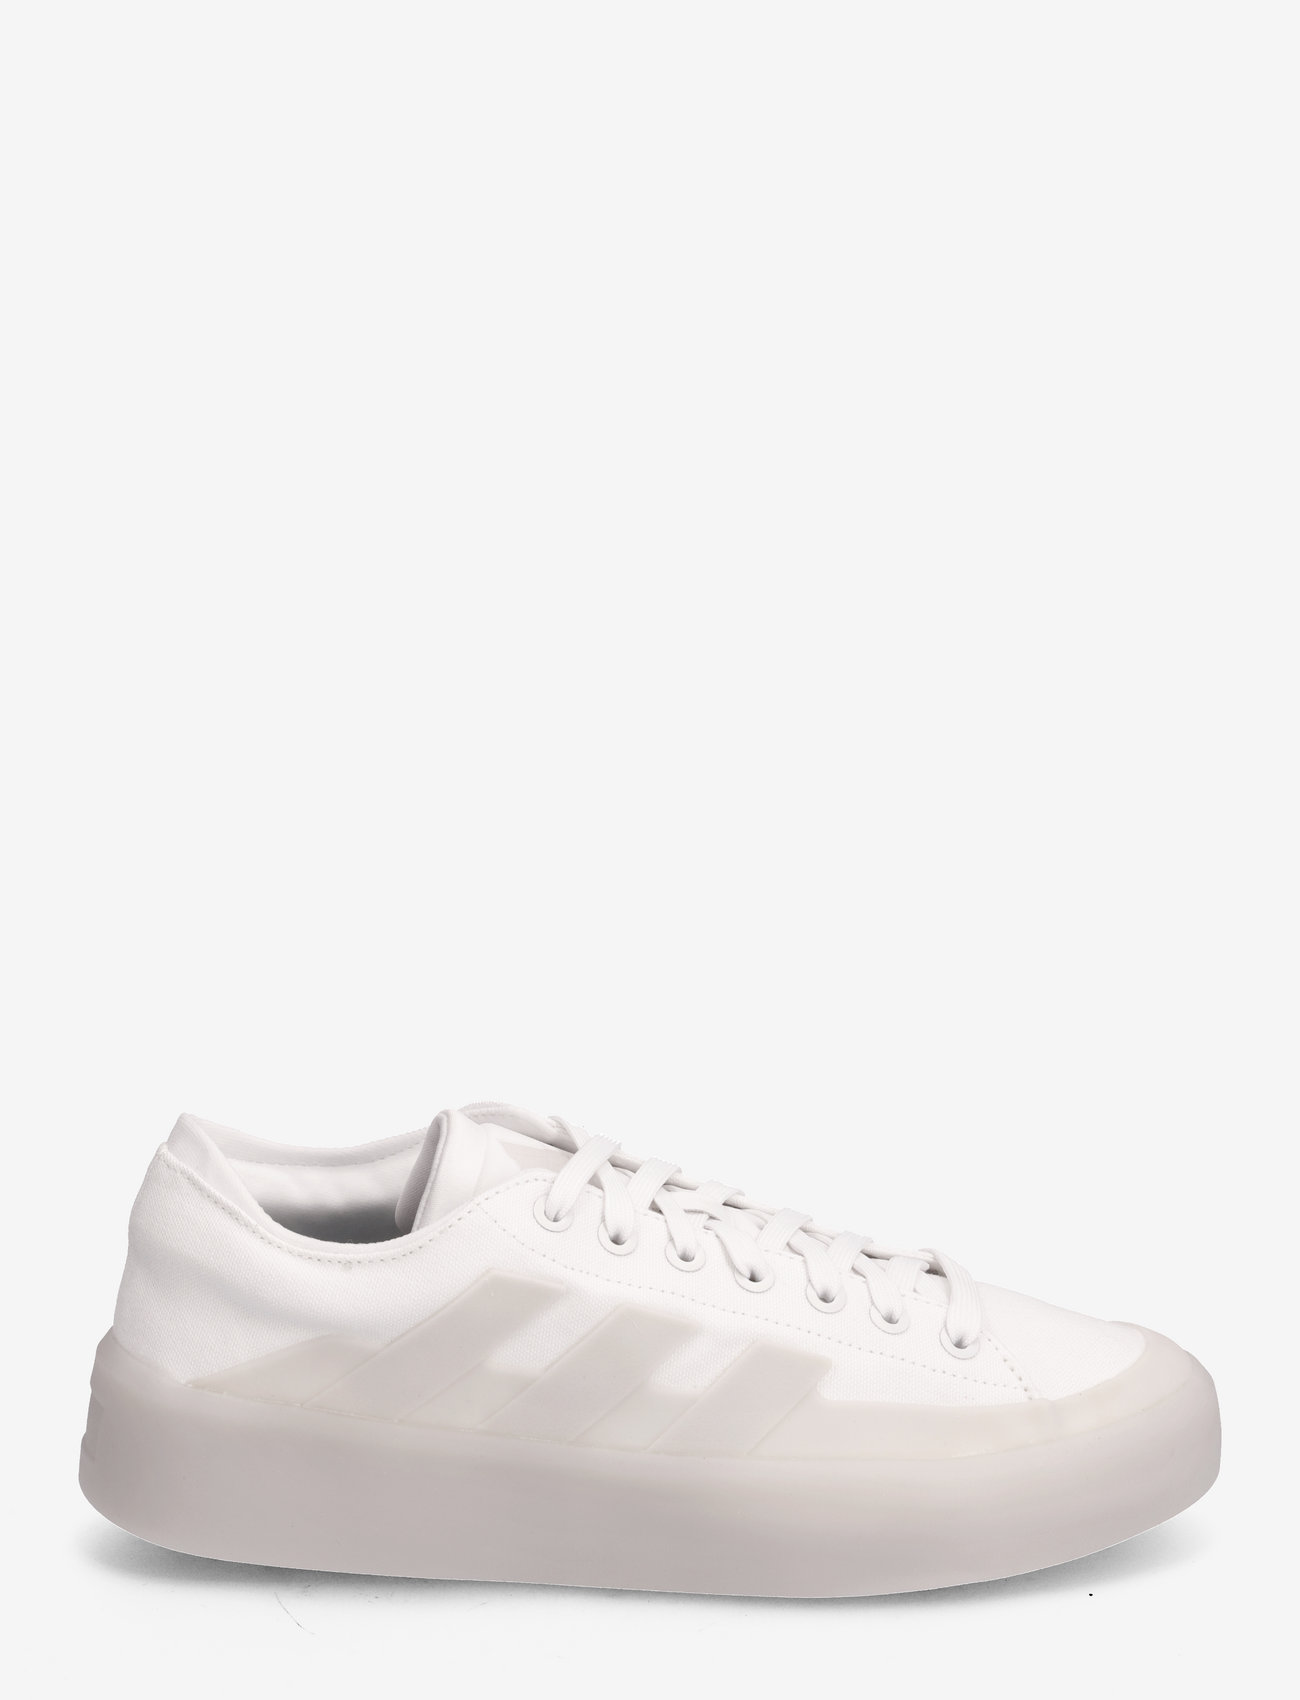 adidas Sportswear - ZNSORED Shoes - low top sneakers - crywht/ftwwht/ftwwht - 1